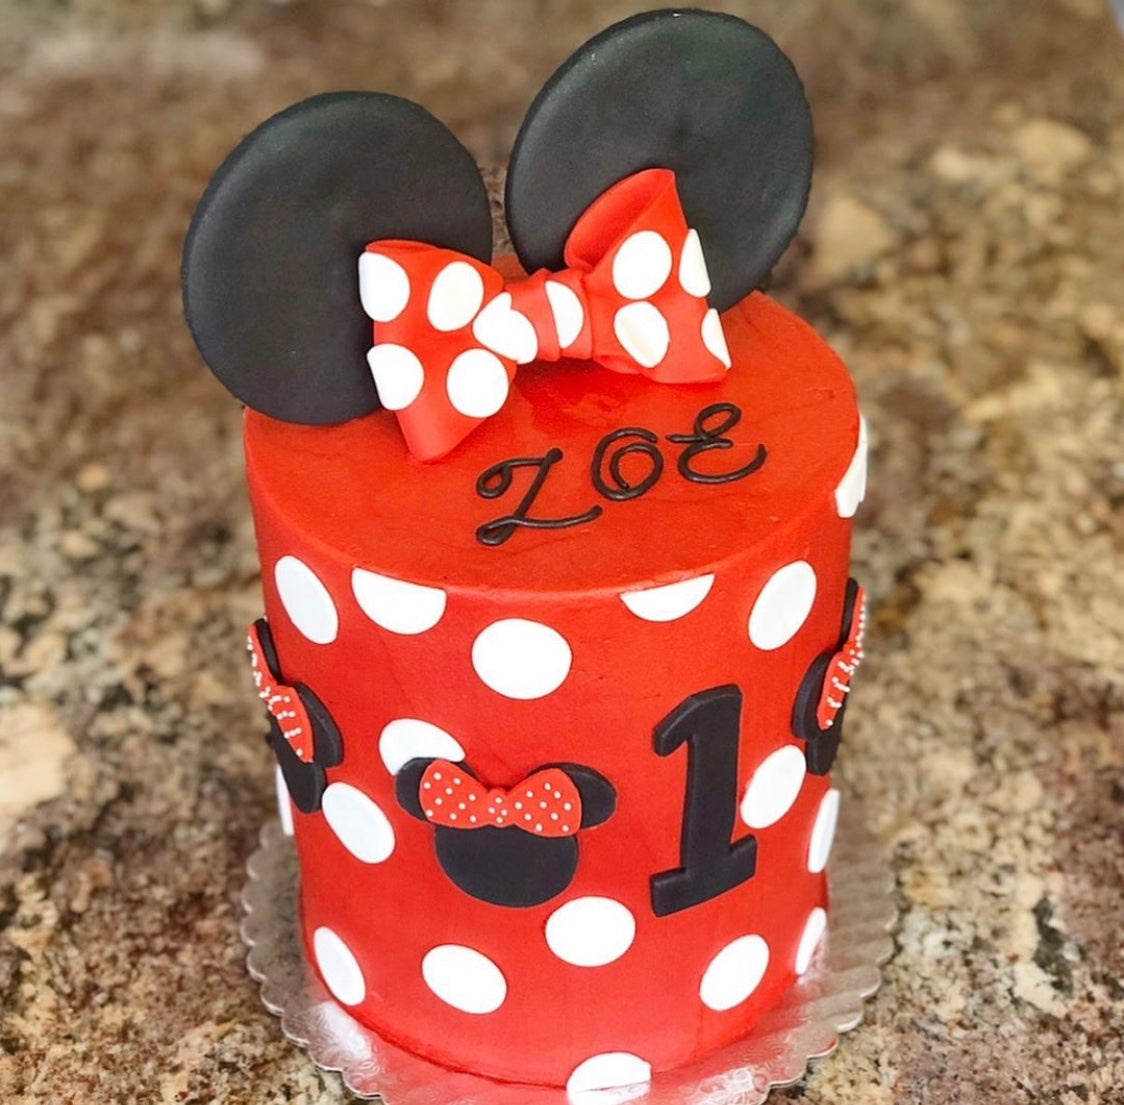 SMALL RED MINNIE MOUSE CAKE-NO-817 – B-Top Bakery